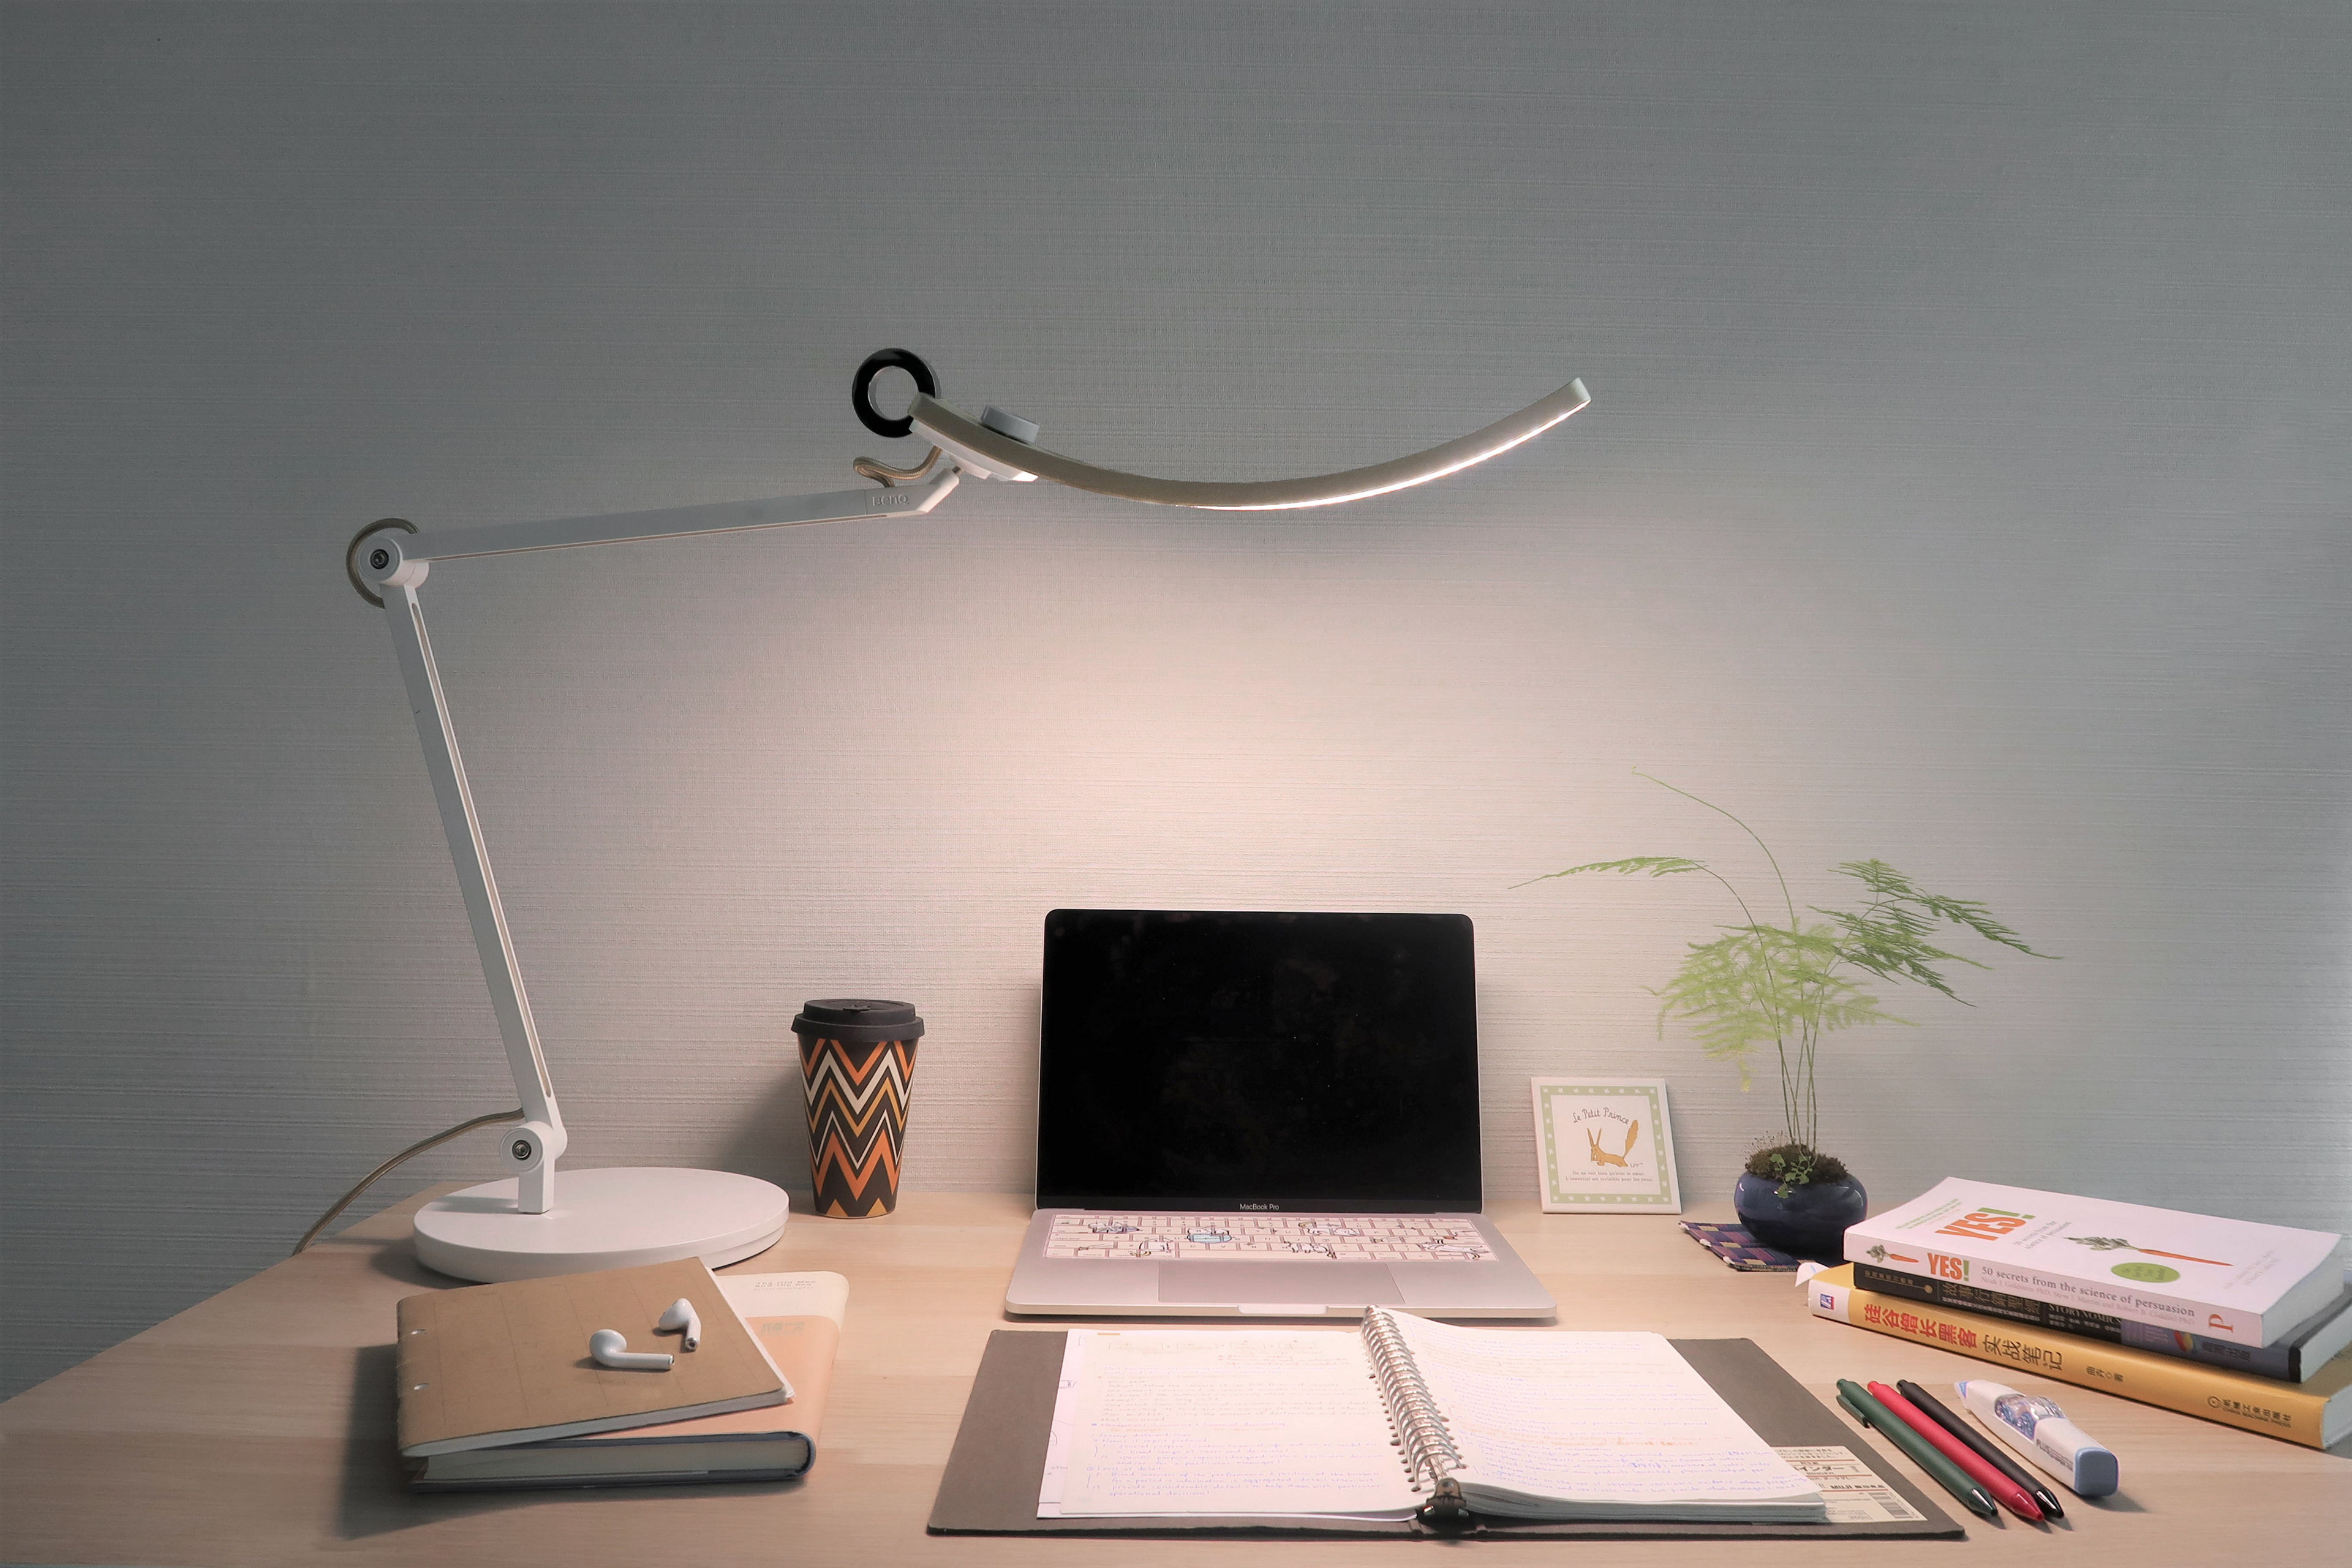 How Many Lumens for a Desk Lamp: Is 500 Lumens Good Enough for Reading?